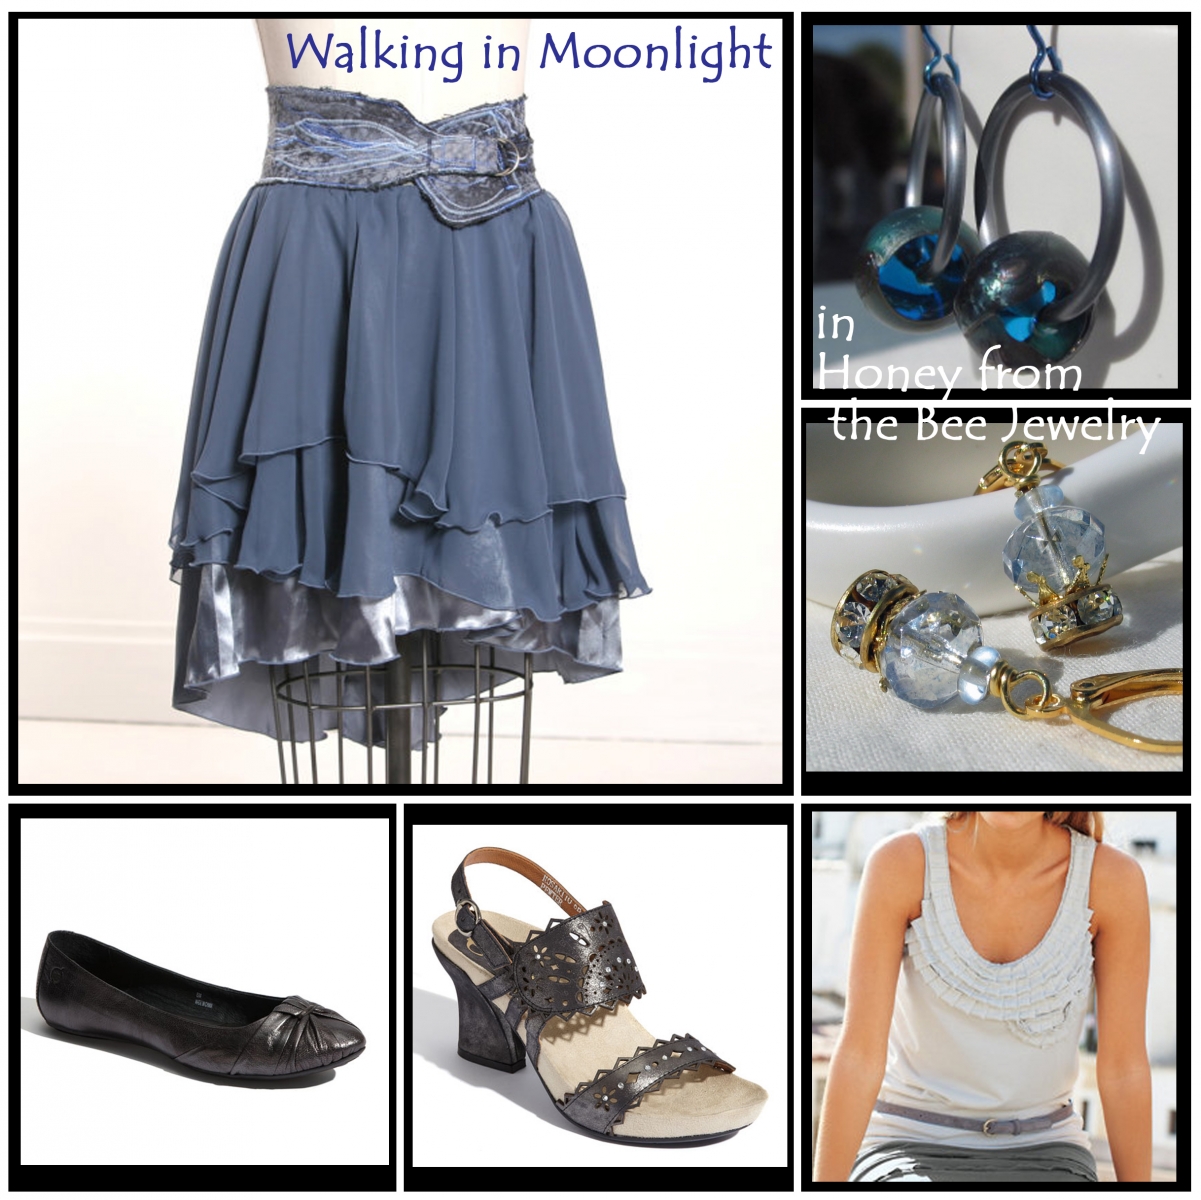 Moonlight inspired fashion and jewelry